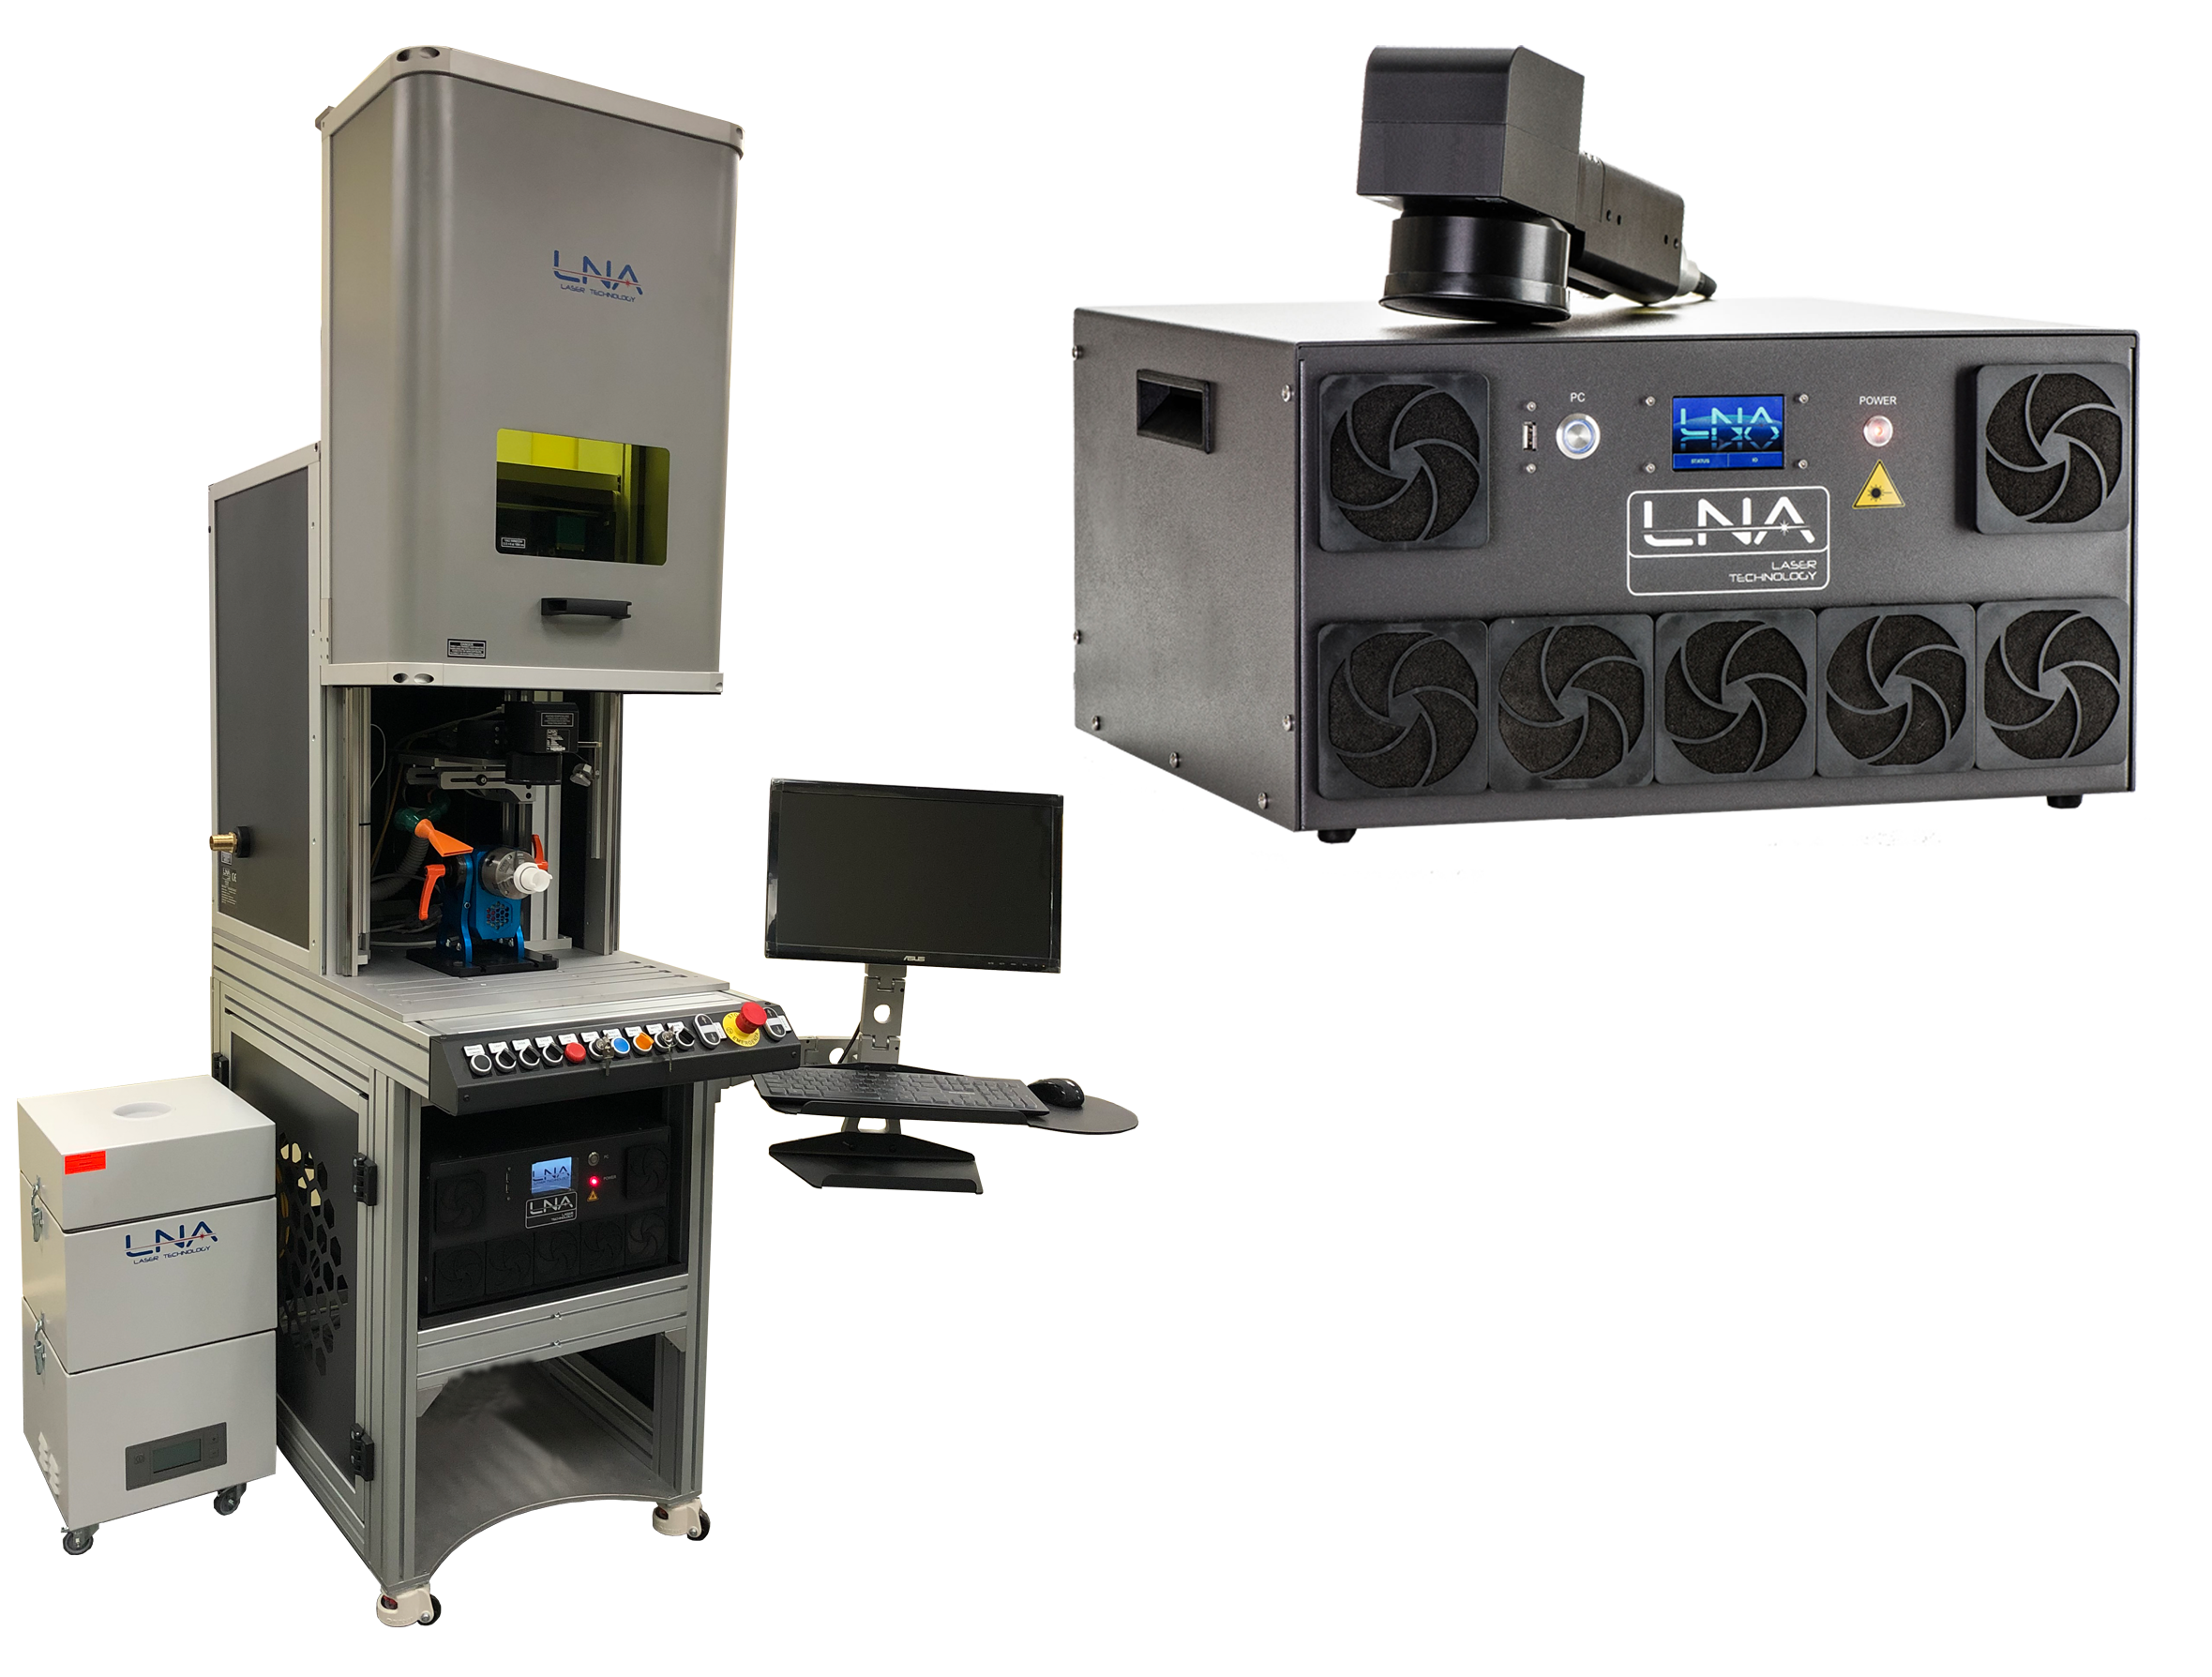 LNA Laser - Laser Marking and Welding Systems for Manufacturing